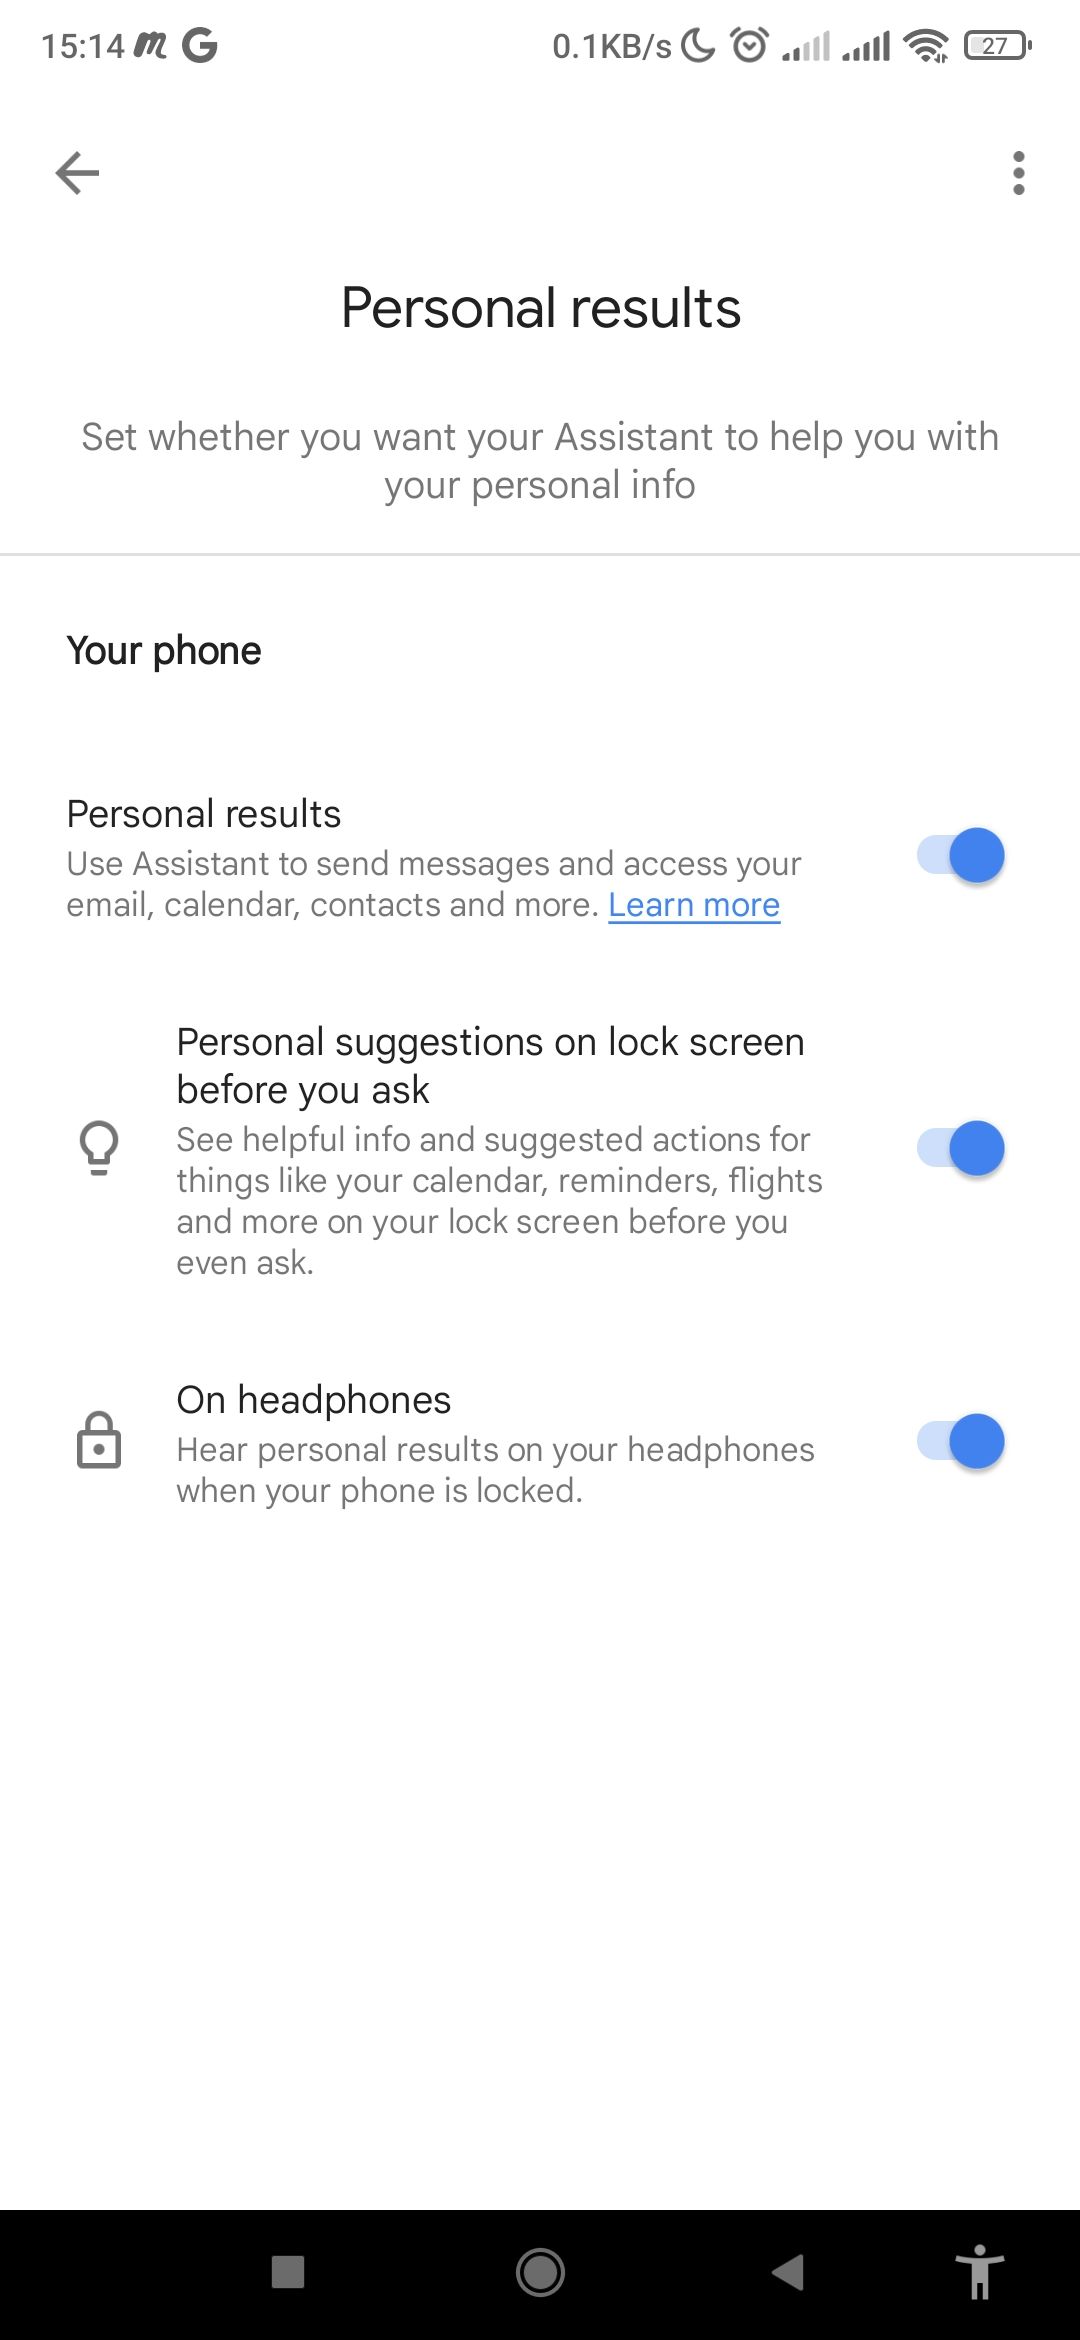 Key settings to enable when personalizing Google Assistant on Android